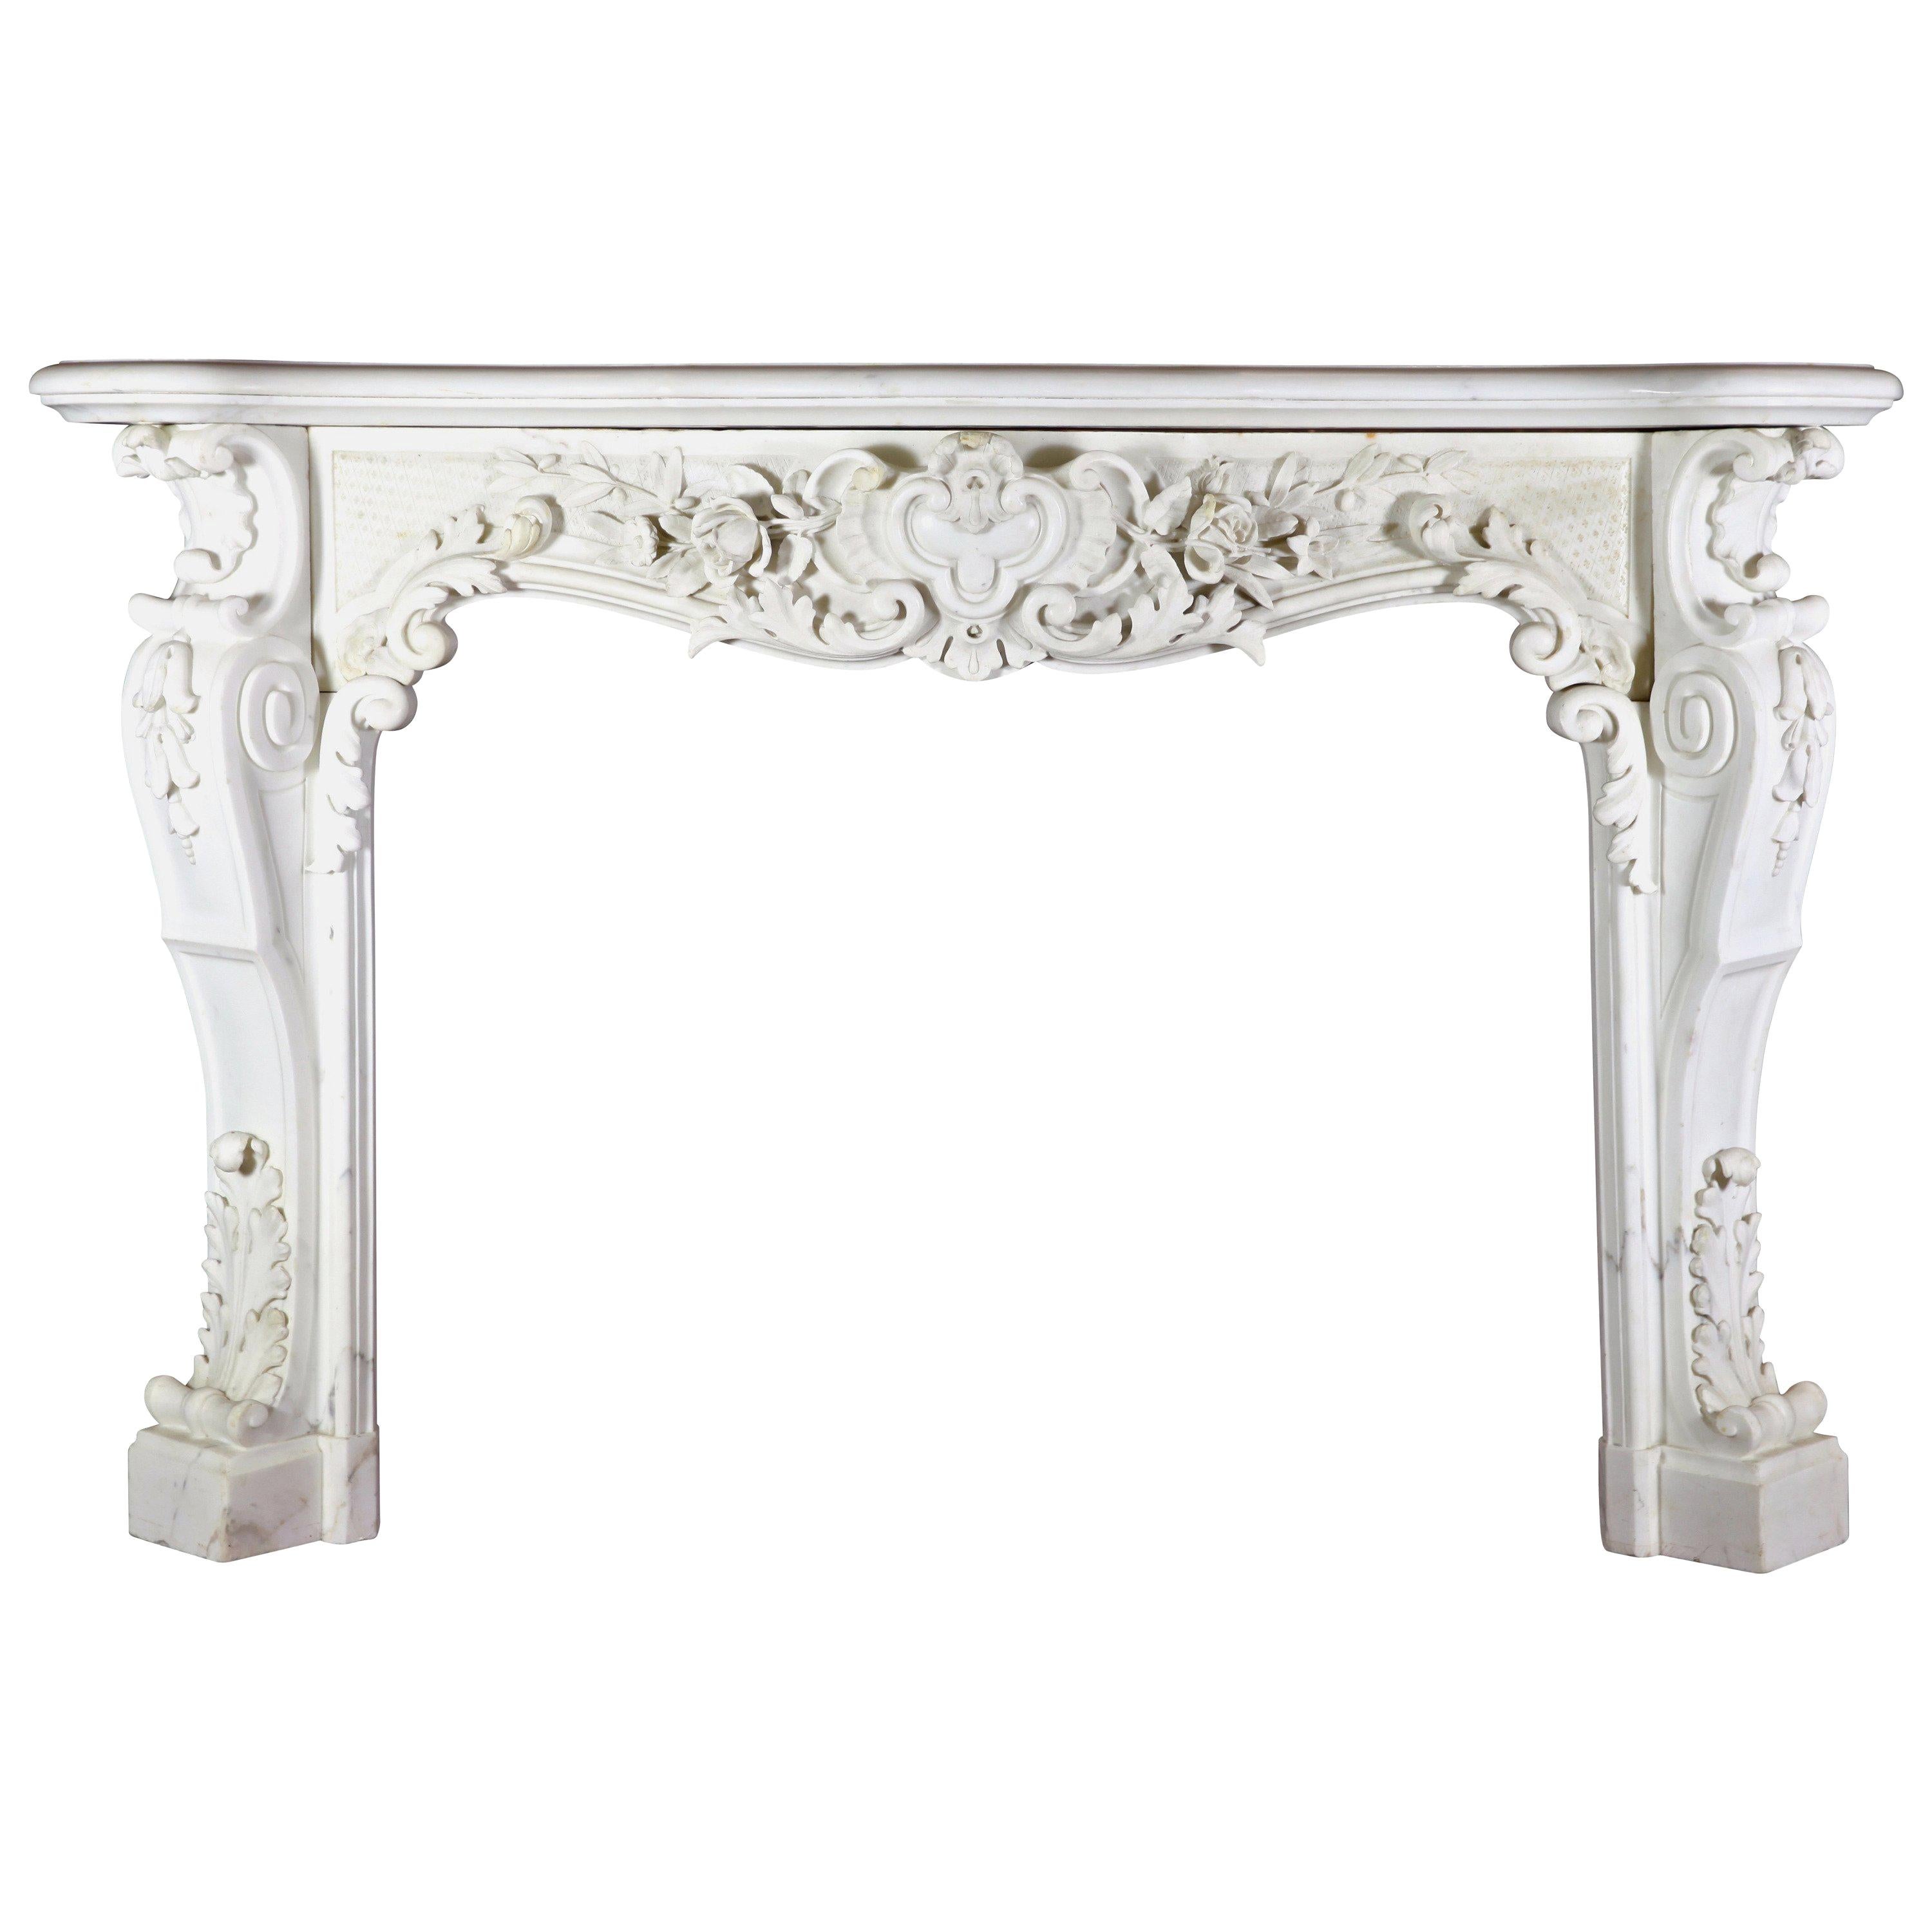 European Opulent White Statuary Marble Fireplace Surround For Sale